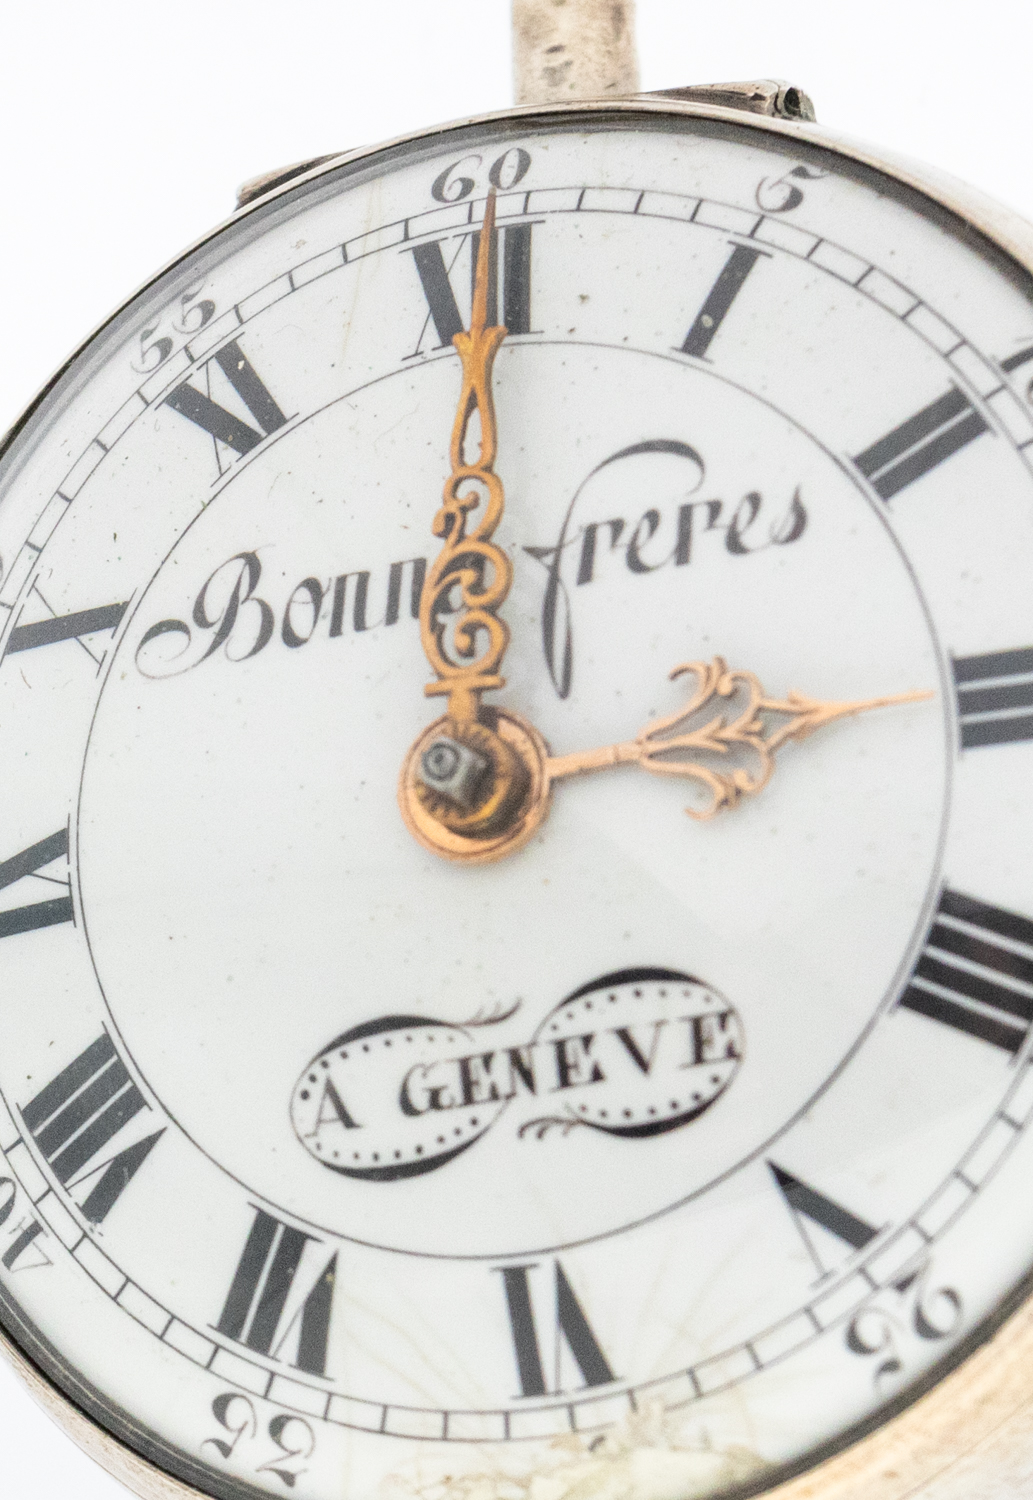 A George III continental Bonna Freres A Geneve silver cased pocket watch, white enamel signed dial - Image 2 of 3